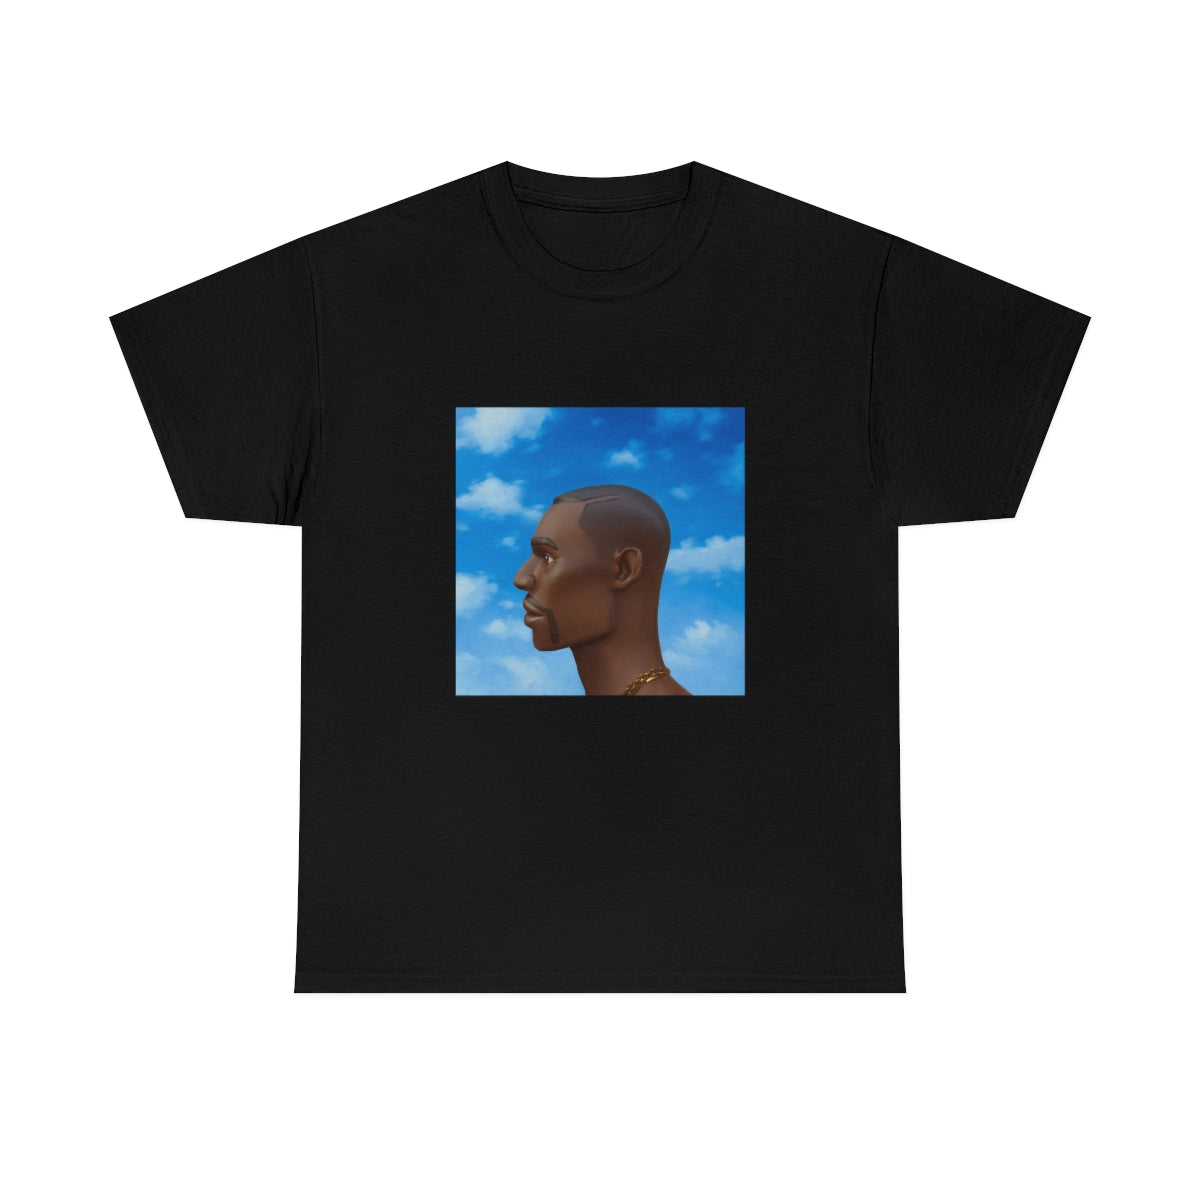 NOTHING WAS THE SAME x FORTNITE TEE